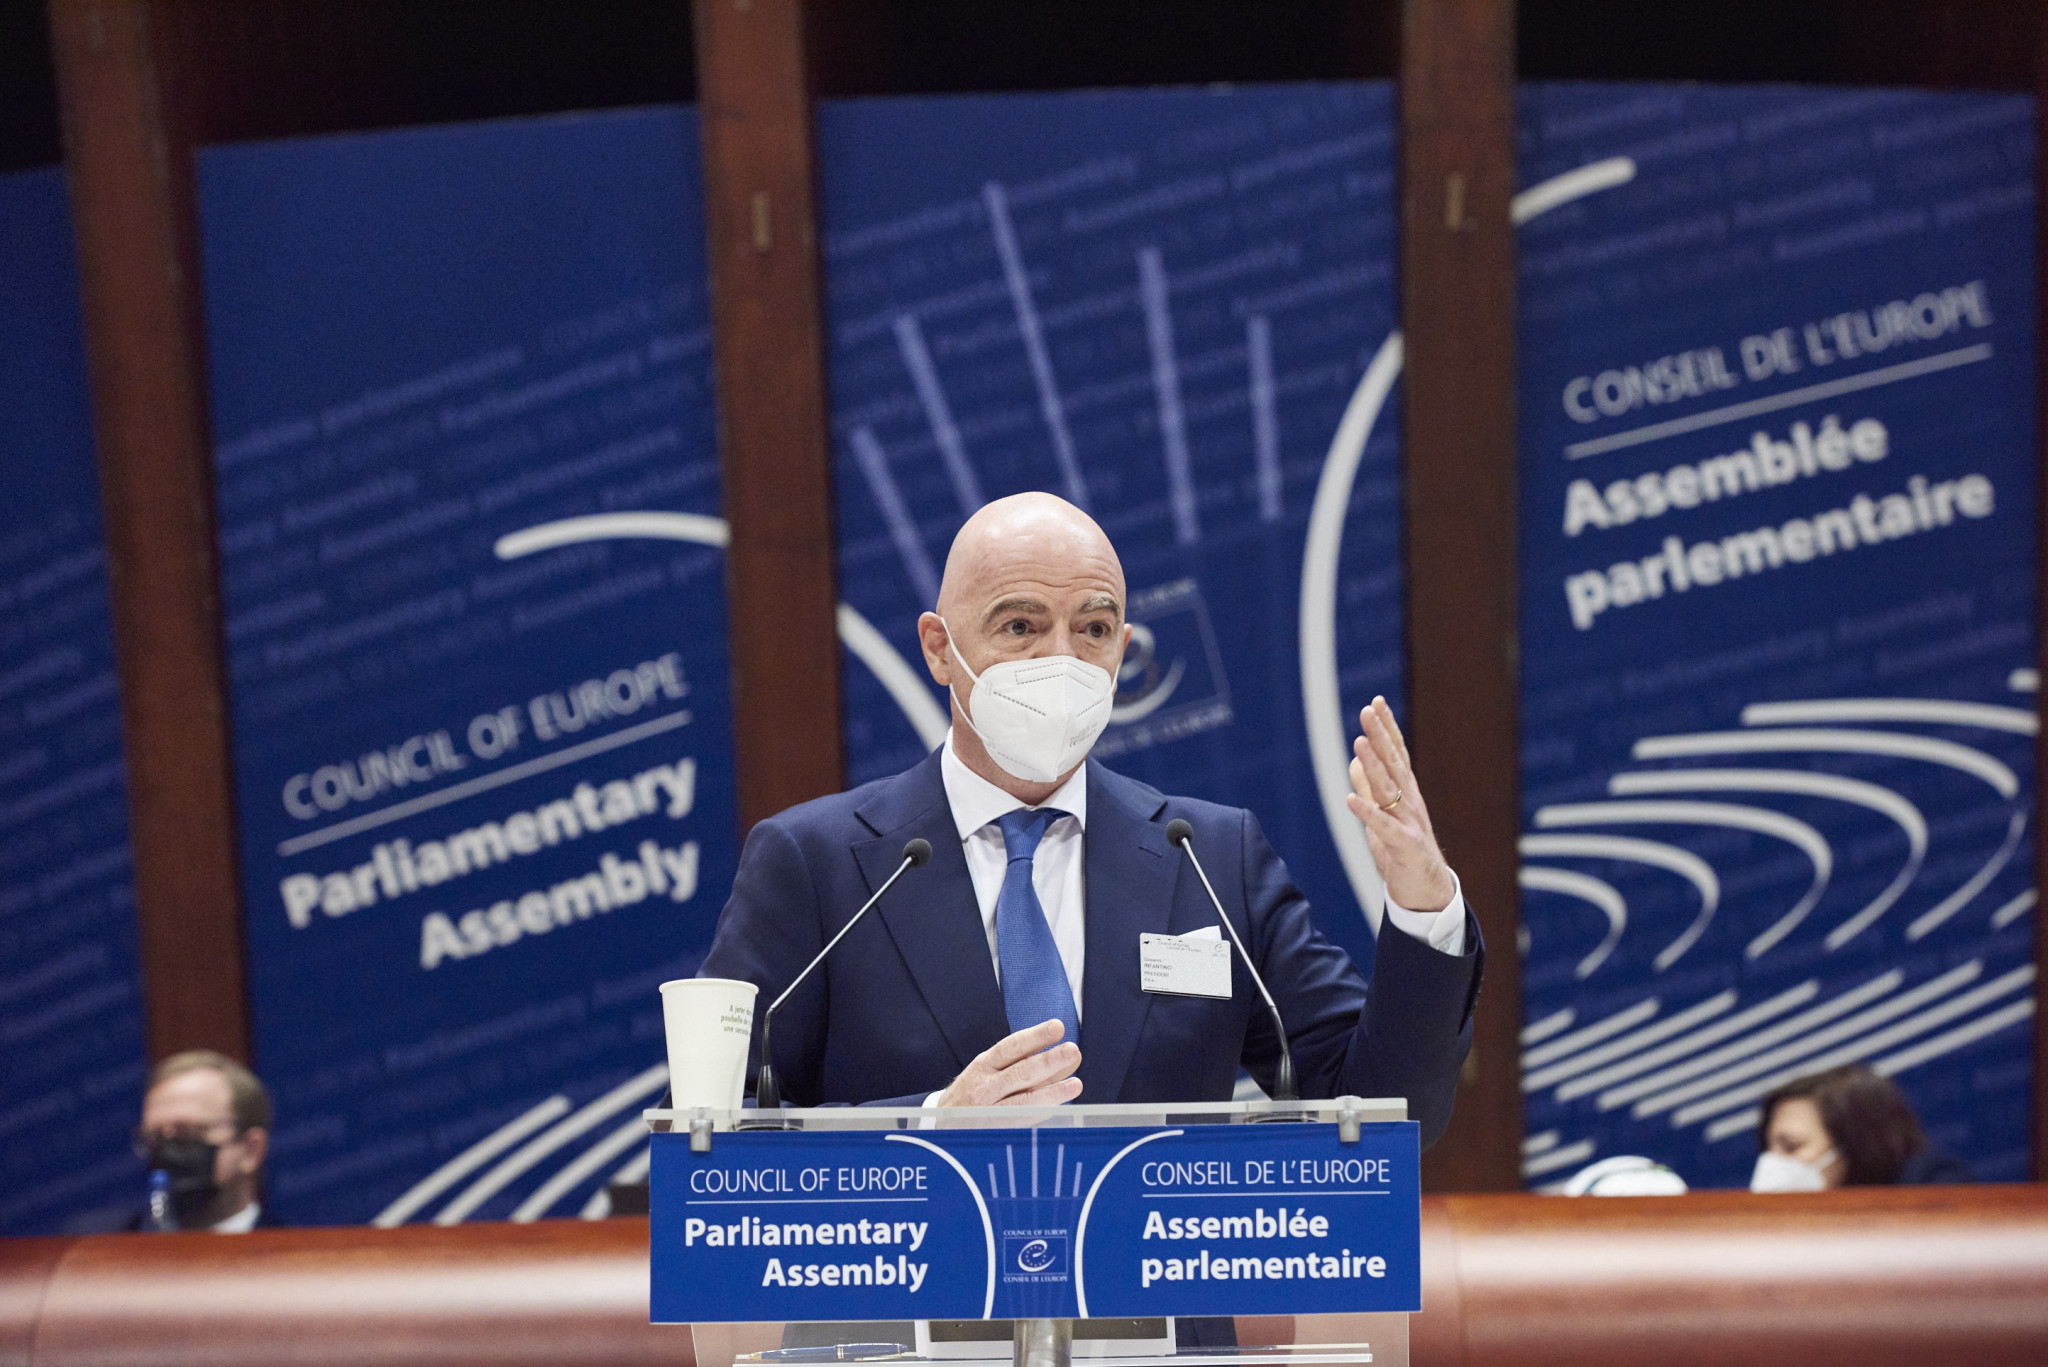 FIFA President Gianni Infantino was widely criticised for his remarks at the Council of Europe session ©FIFA